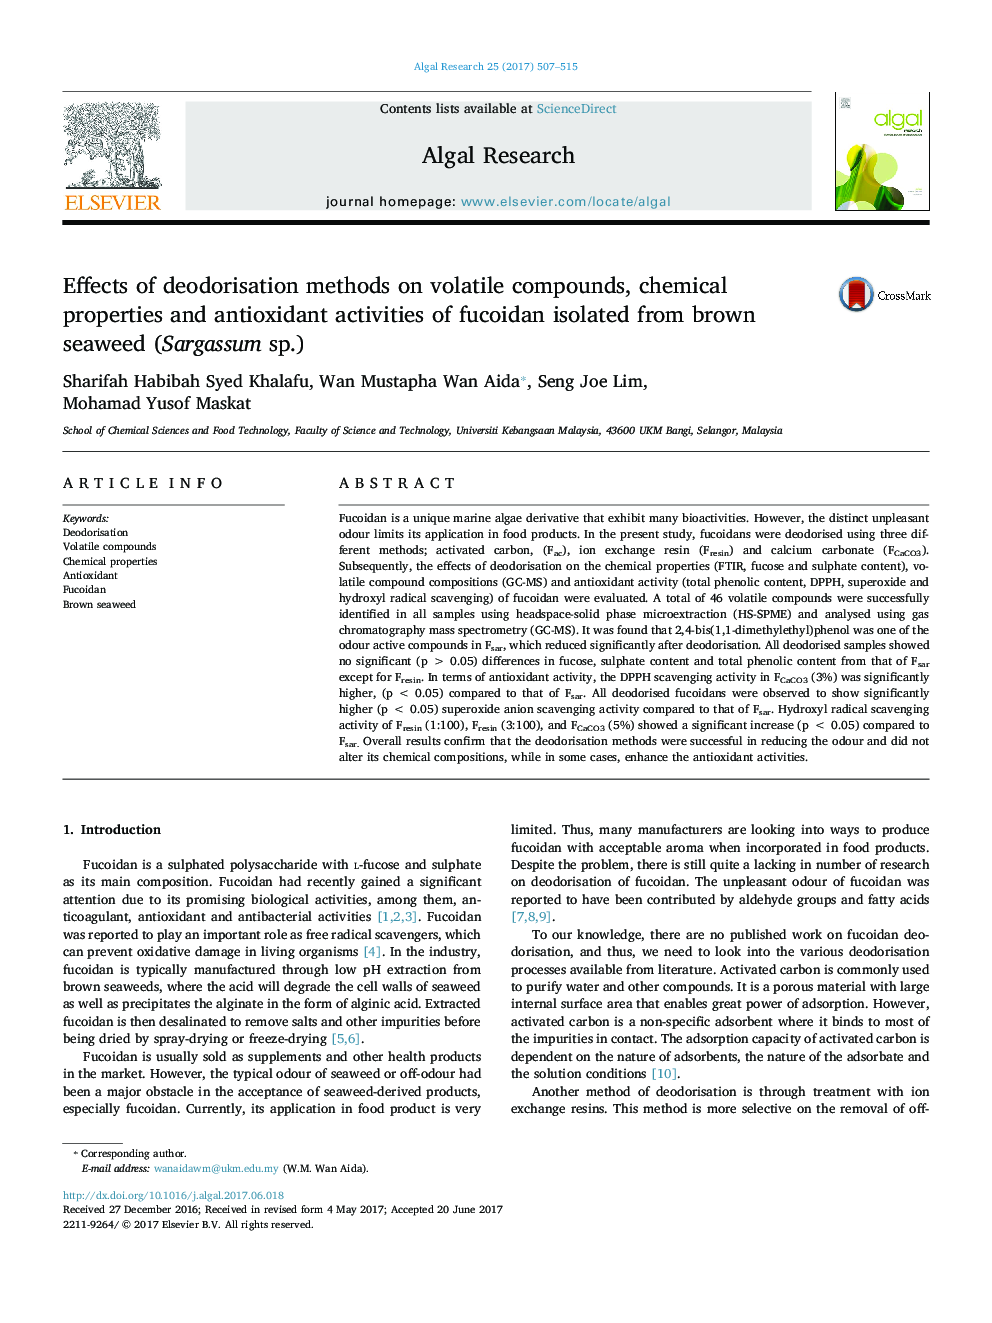 Effects of deodorisation methods on volatile compounds, chemical properties and antioxidant activities of fucoidan isolated from brown seaweed (Sargassum sp.)